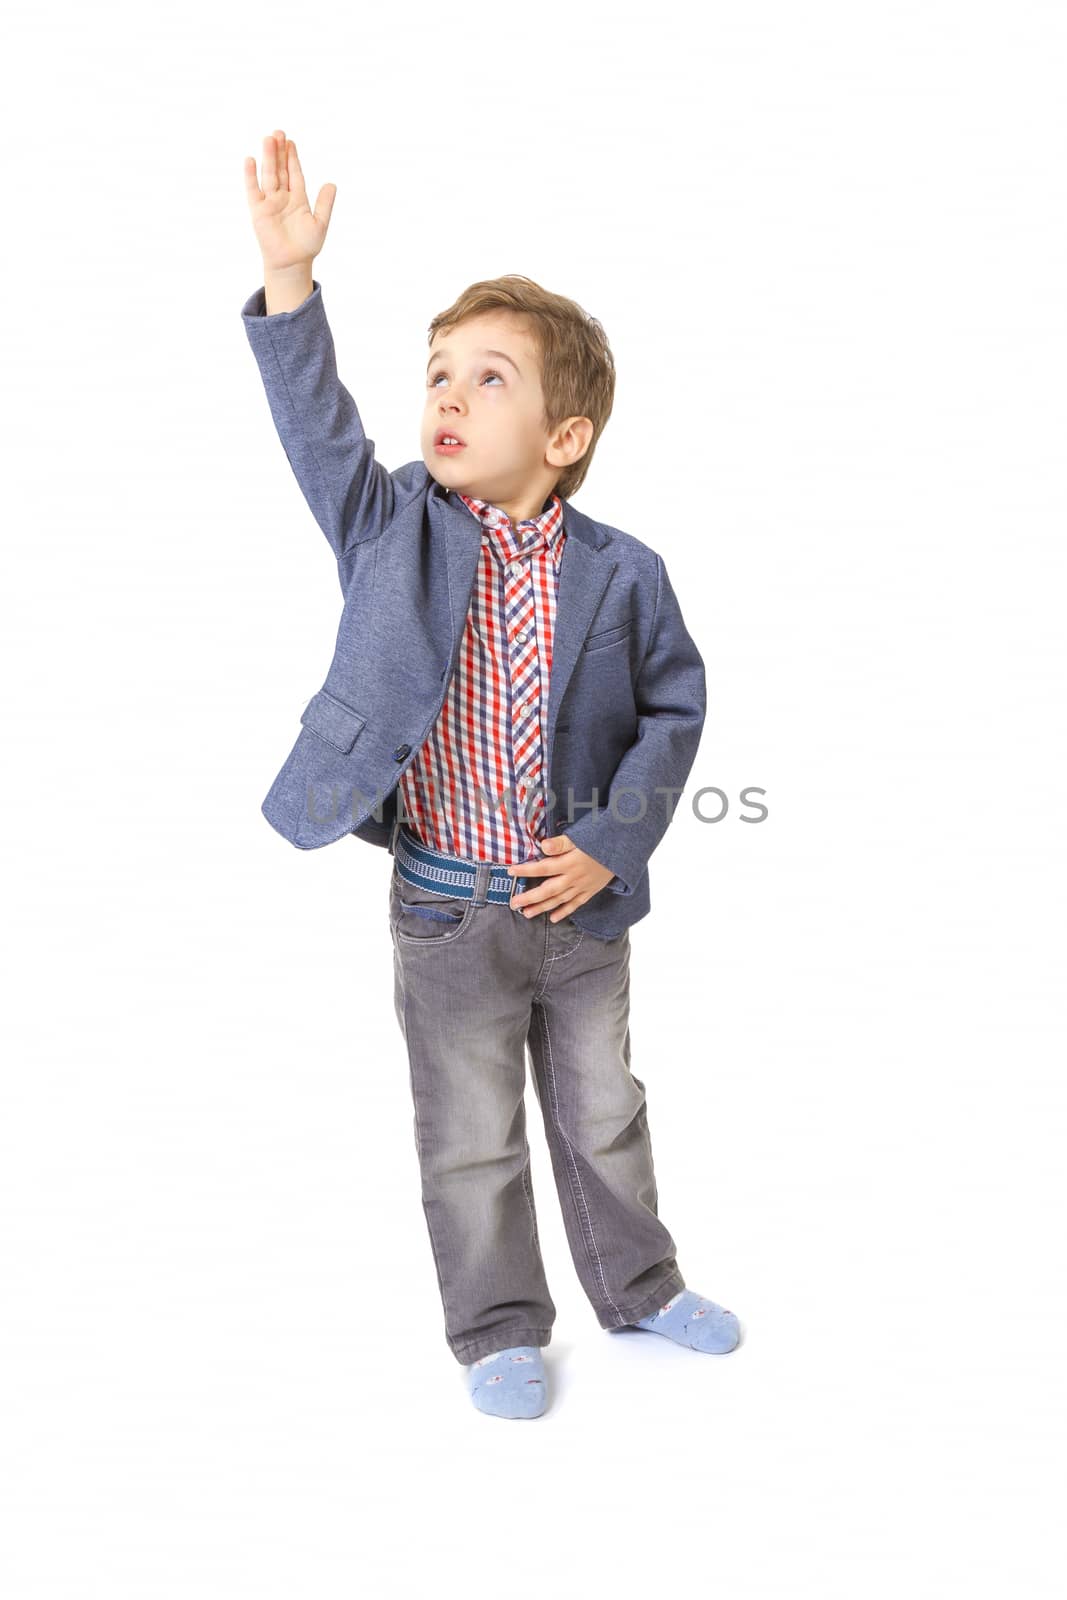 little boy with jacket and shirt with his hand lifted up on white background